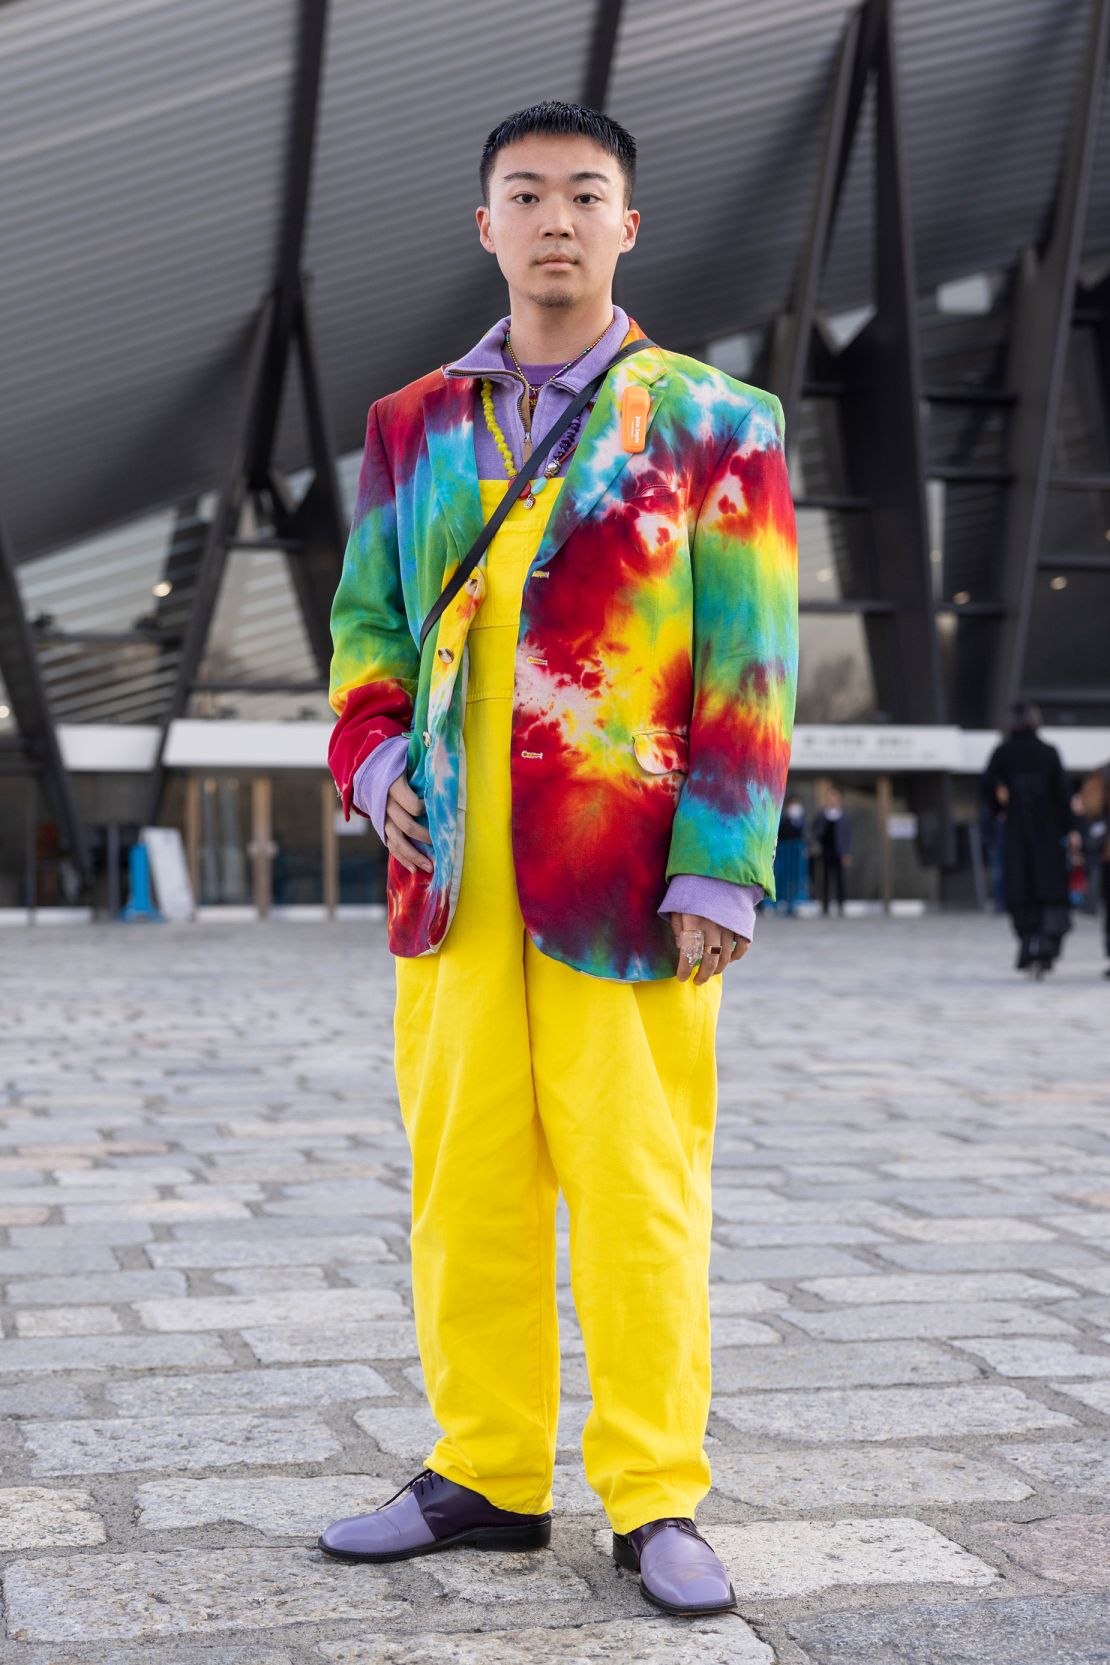 Attendee Bunta Shimizu wearing a colorful outfit at Tokyo Fashion Week on Thursday.